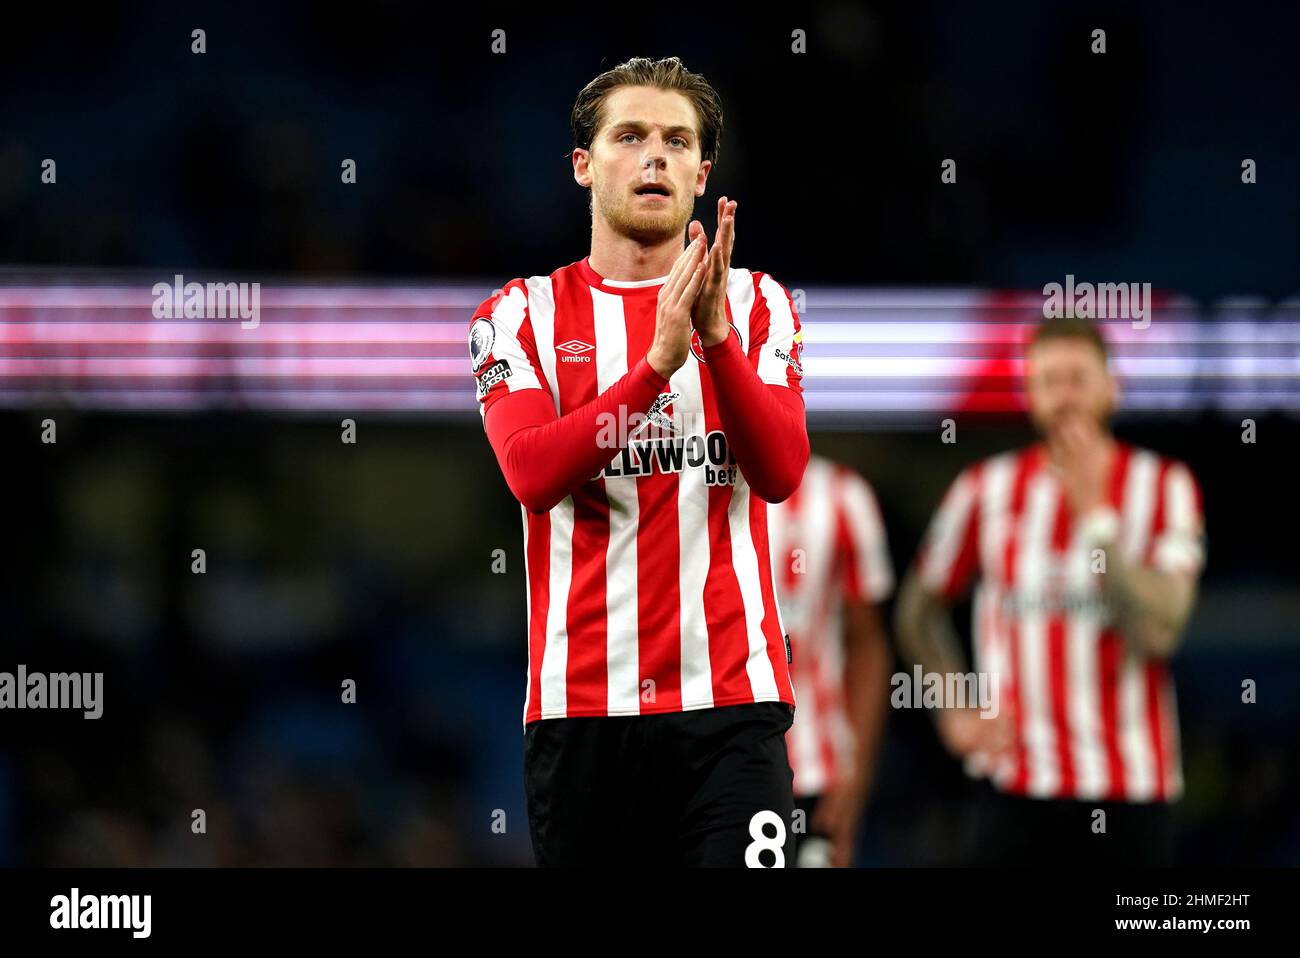 Brentford's Mathias Jensen applauds the fans after during the Premier League match at the Etihad Stadium, Manchester. Picture date: Wednesday February 9, 2022. Stock Photo